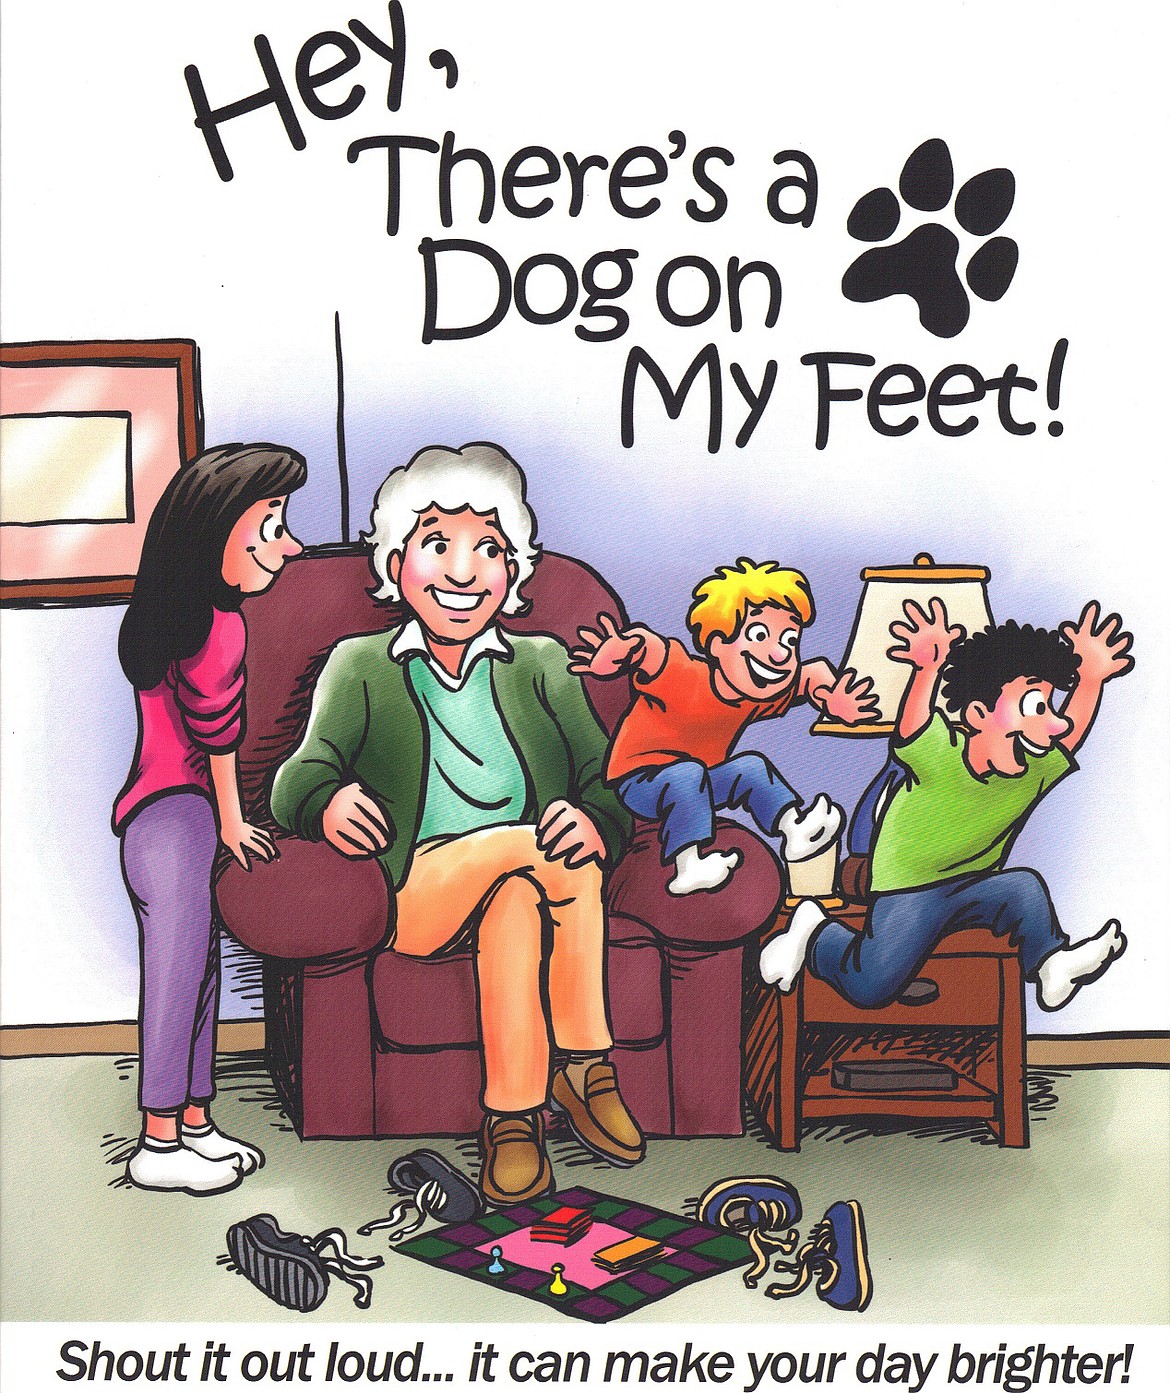 The cover of Lyn D. Nielsen’s children’s book “Hey, There’s a Dog on My Feet!”